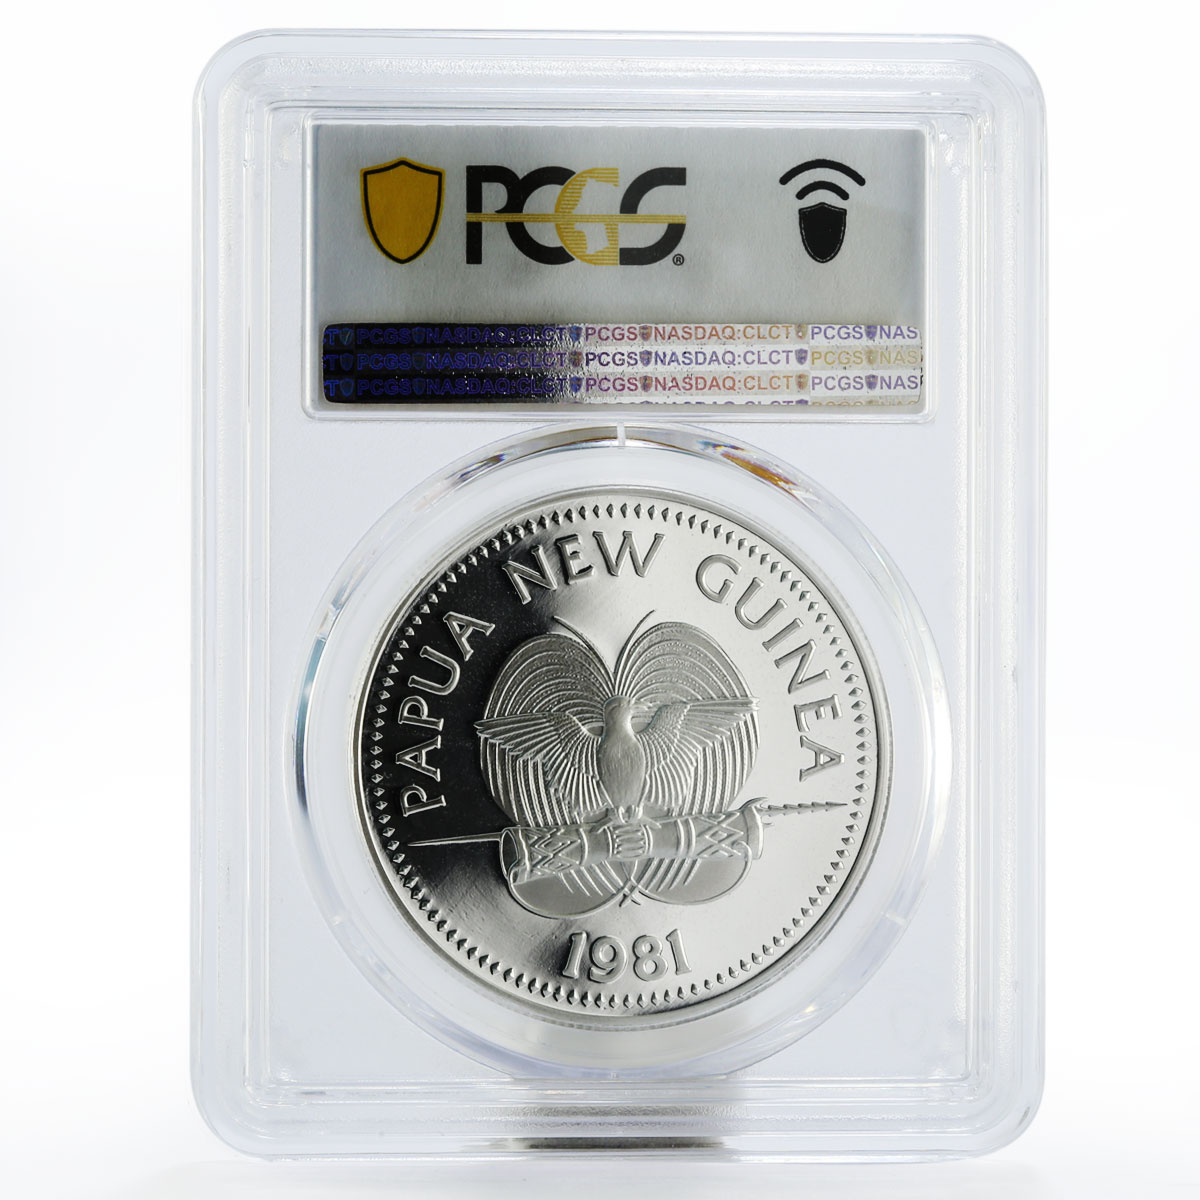 Papua New Guinea 5 kina Year of the Child PR69 PCGS silver coin 1981